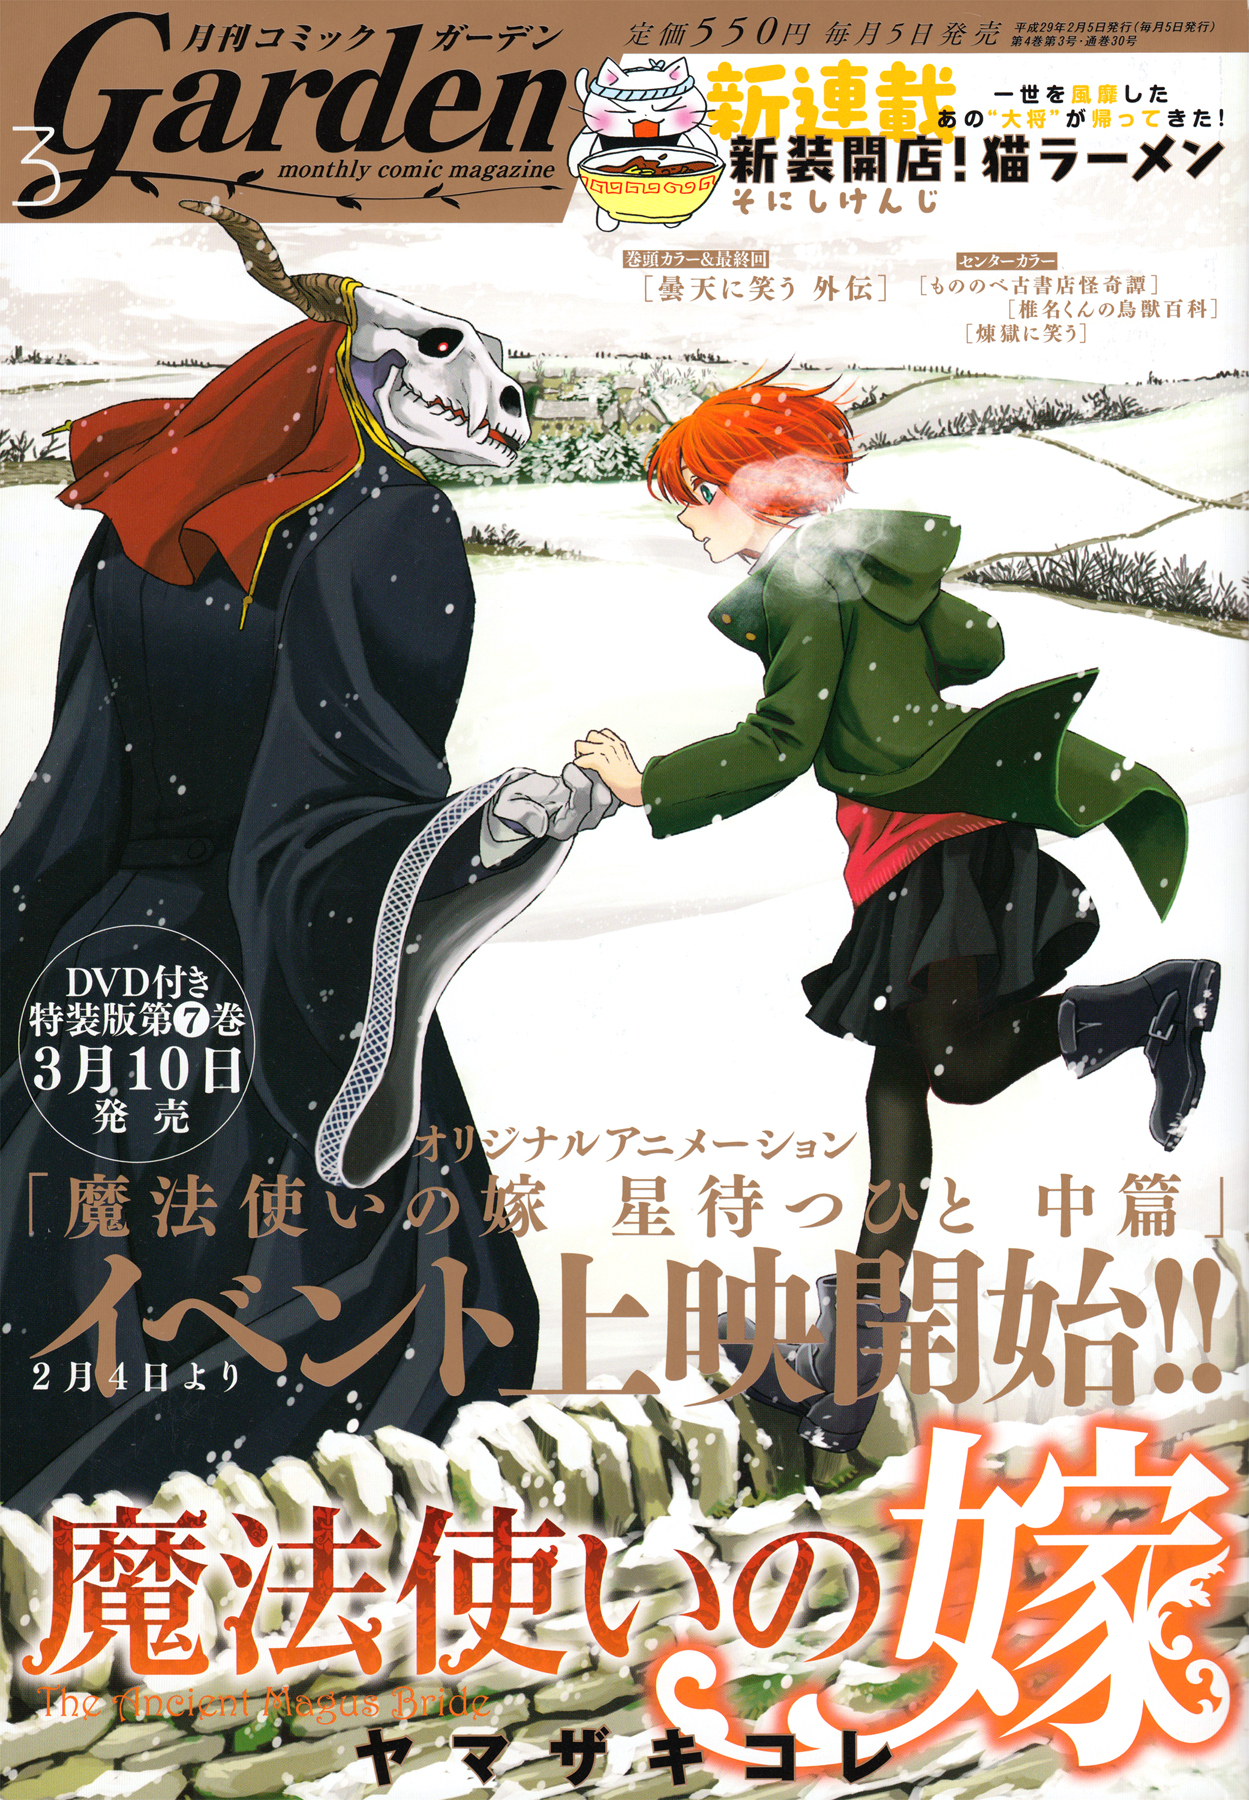 Mahoutsukai no Yome Vol.8-Chapter.36--You-can't-make-an-omelet-without-breaking-a-few-eggs- Image